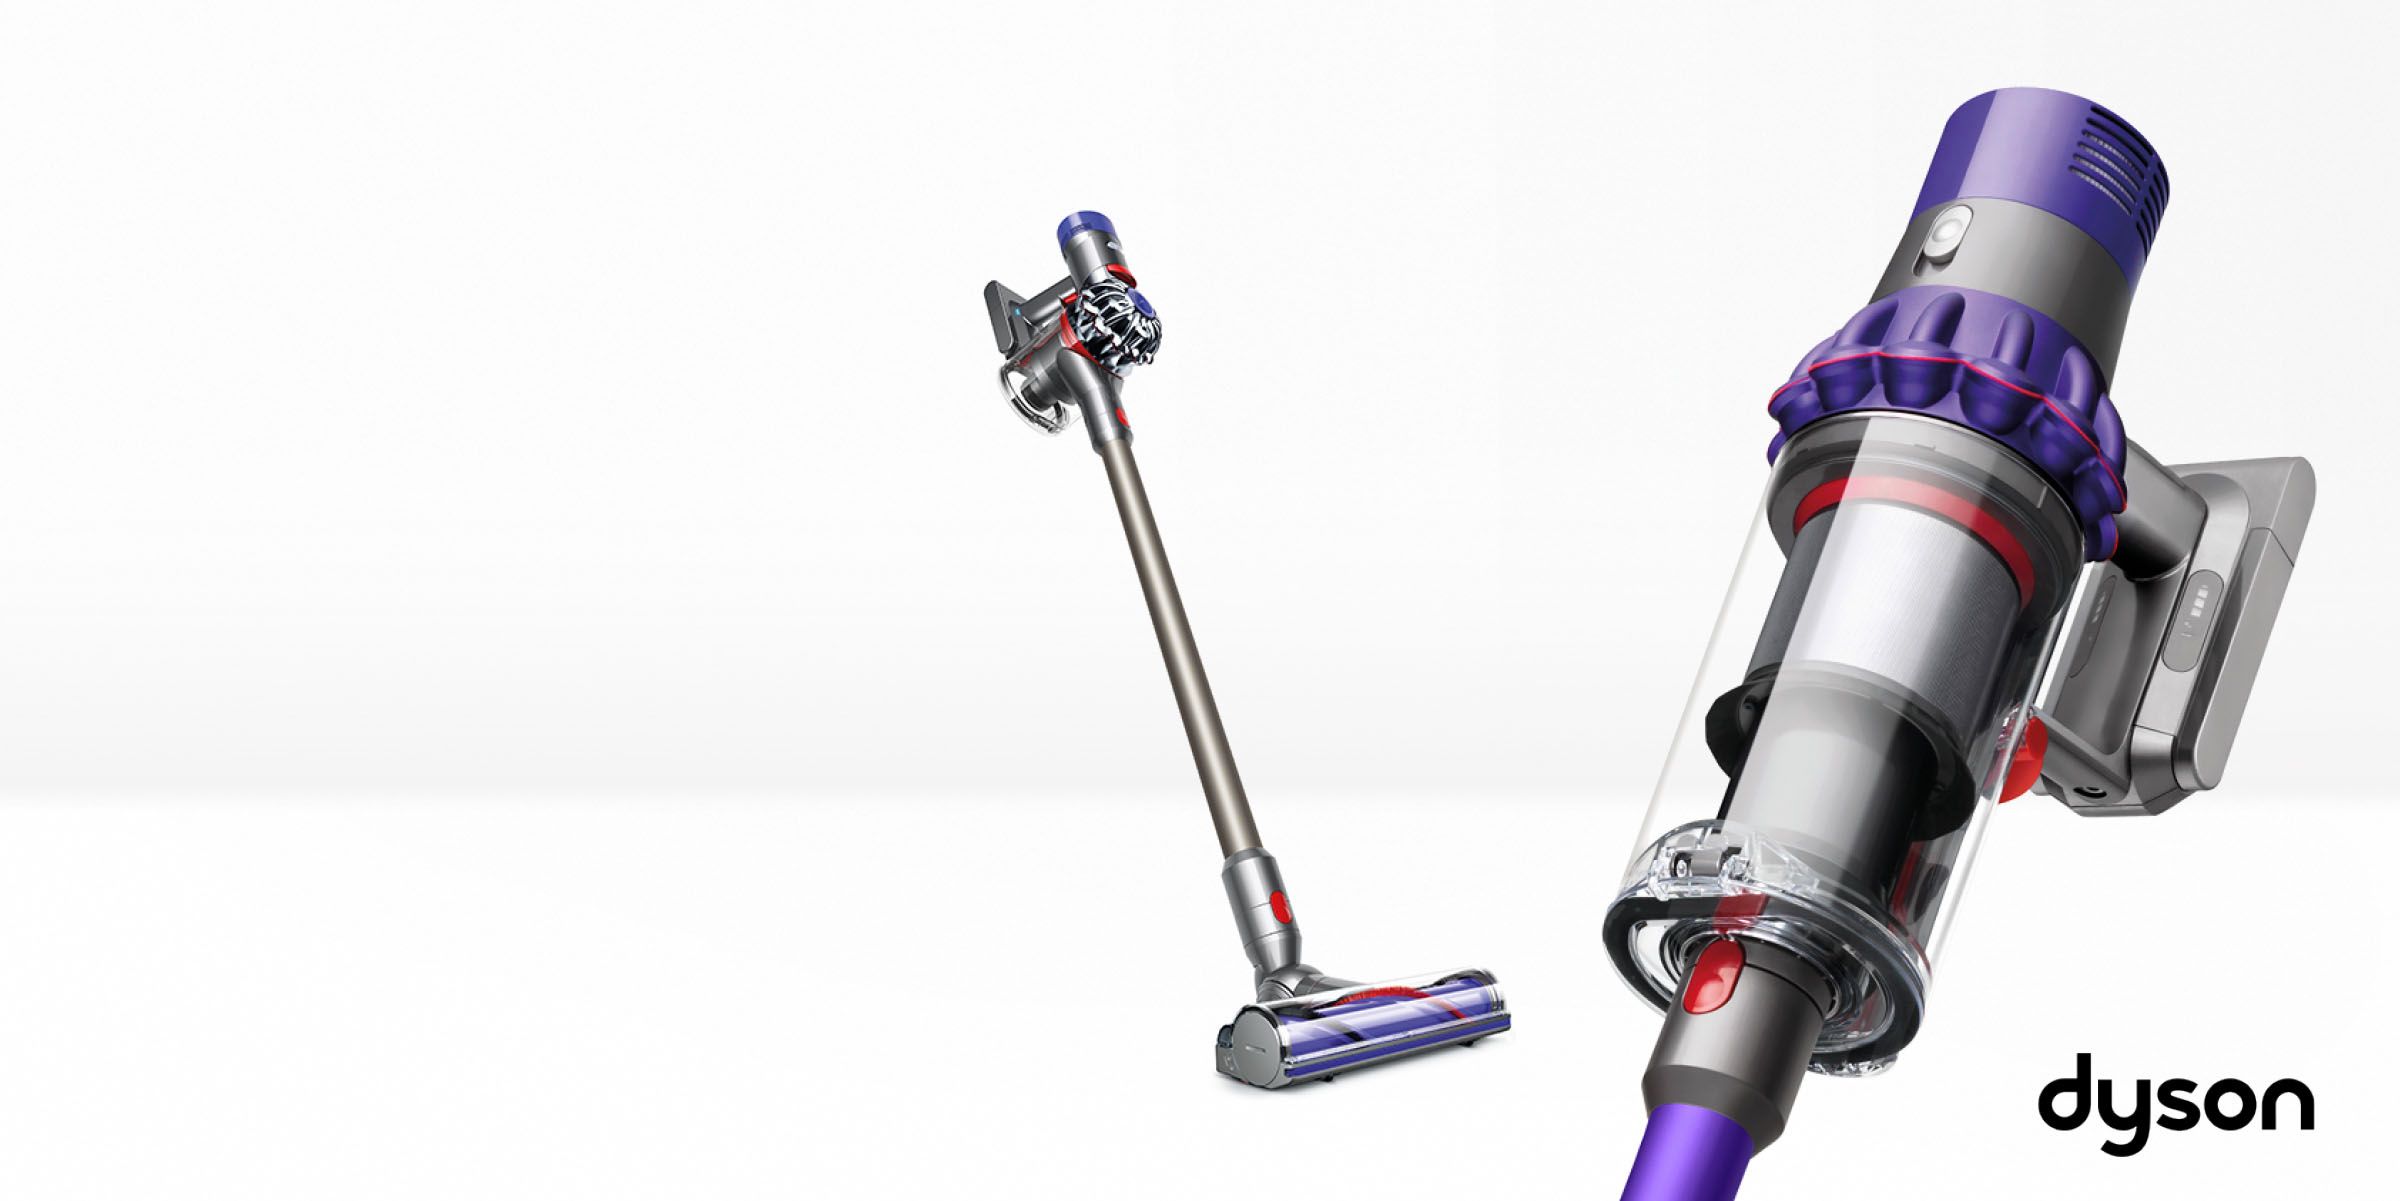 SAVE UP TO £100 ON DYSON TECHNOLOGY*